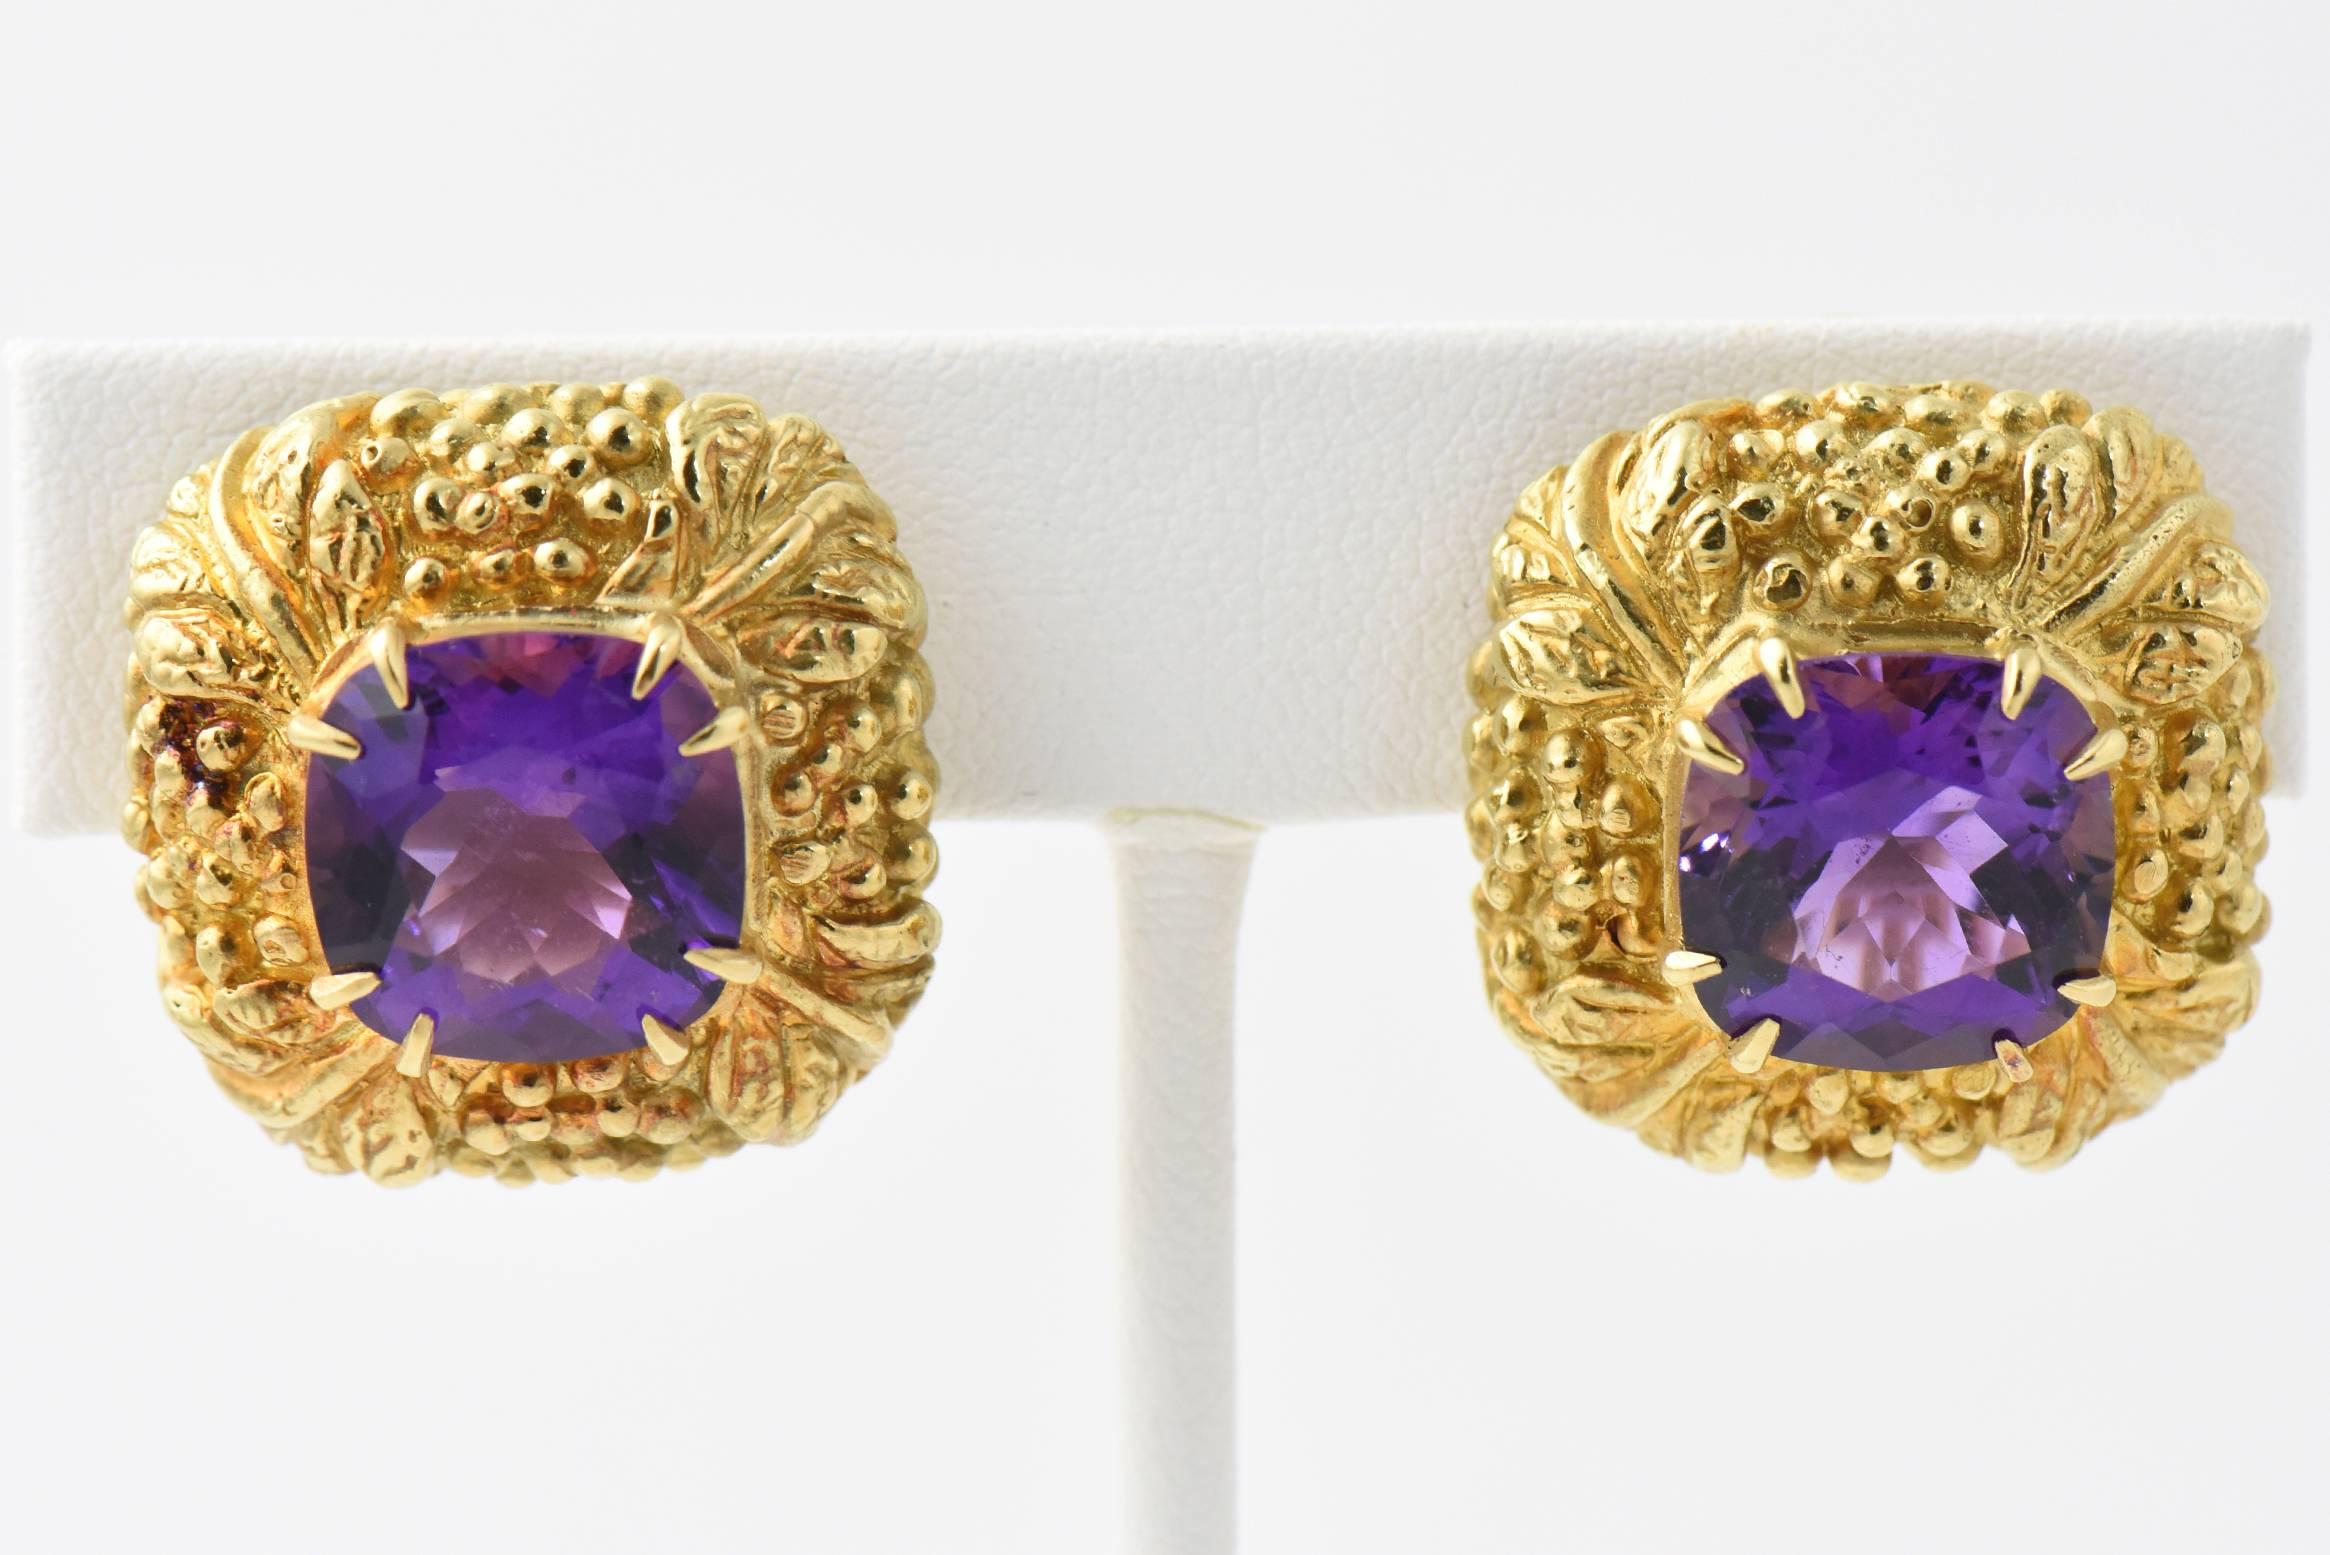 Cushion Cut Highly Stylized Amethyst Gold Square Earclips Earrings